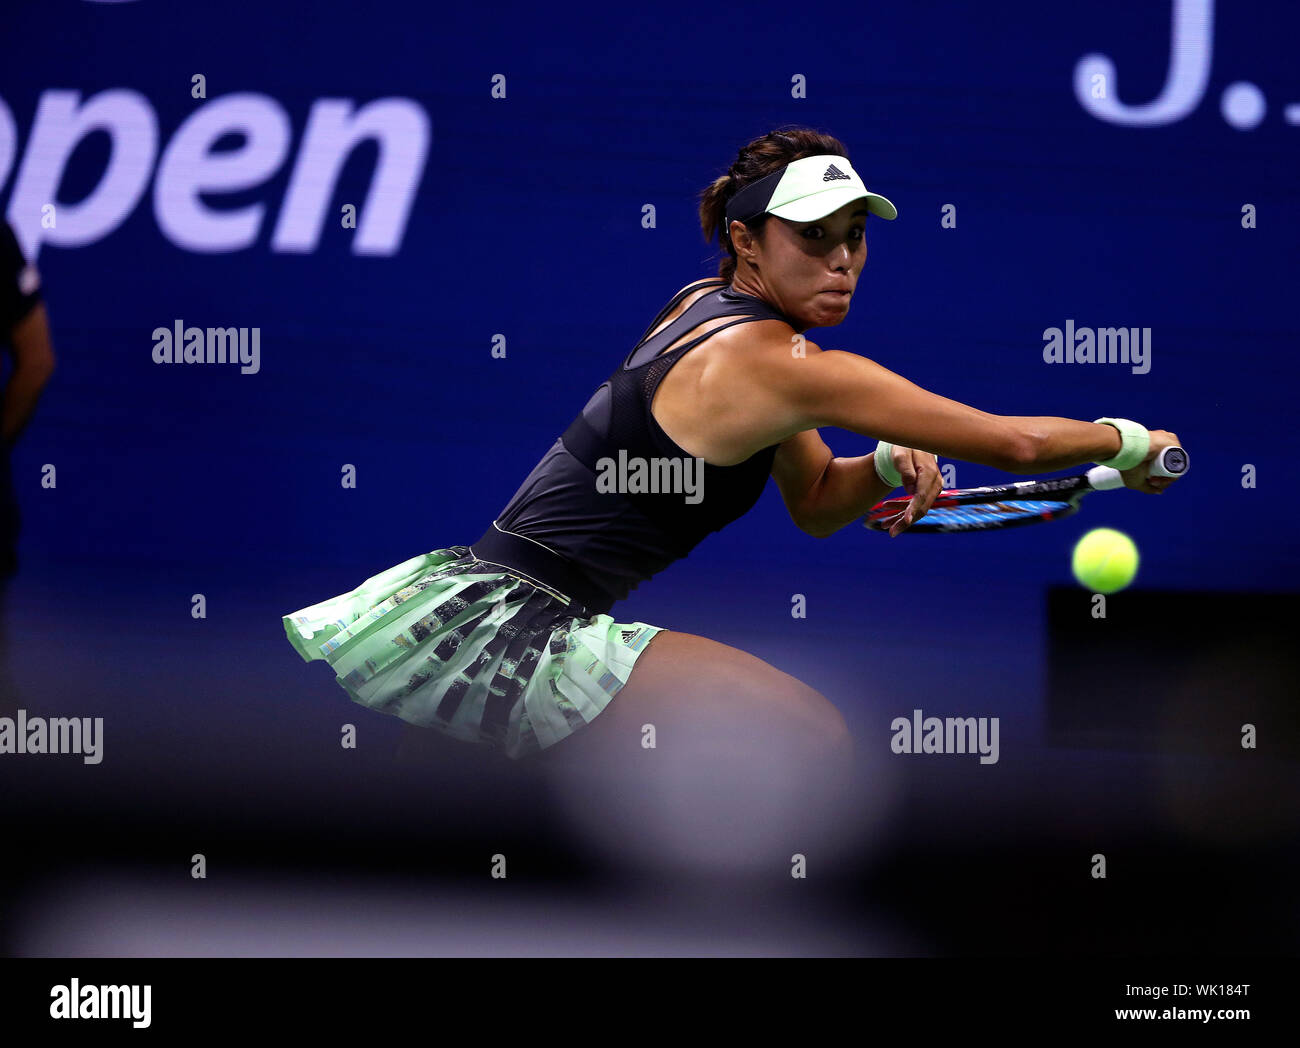 Flushing Meadows, New York, United States - 3 September 2019. Wang Qiang of China during her quarter final match against Serena Williams at the US Open in Flushing Meadows, New York.   Williams won the match to record her 100th US Open match victory. Credit: Adam Stoltman/Alamy Live News Stock Photo